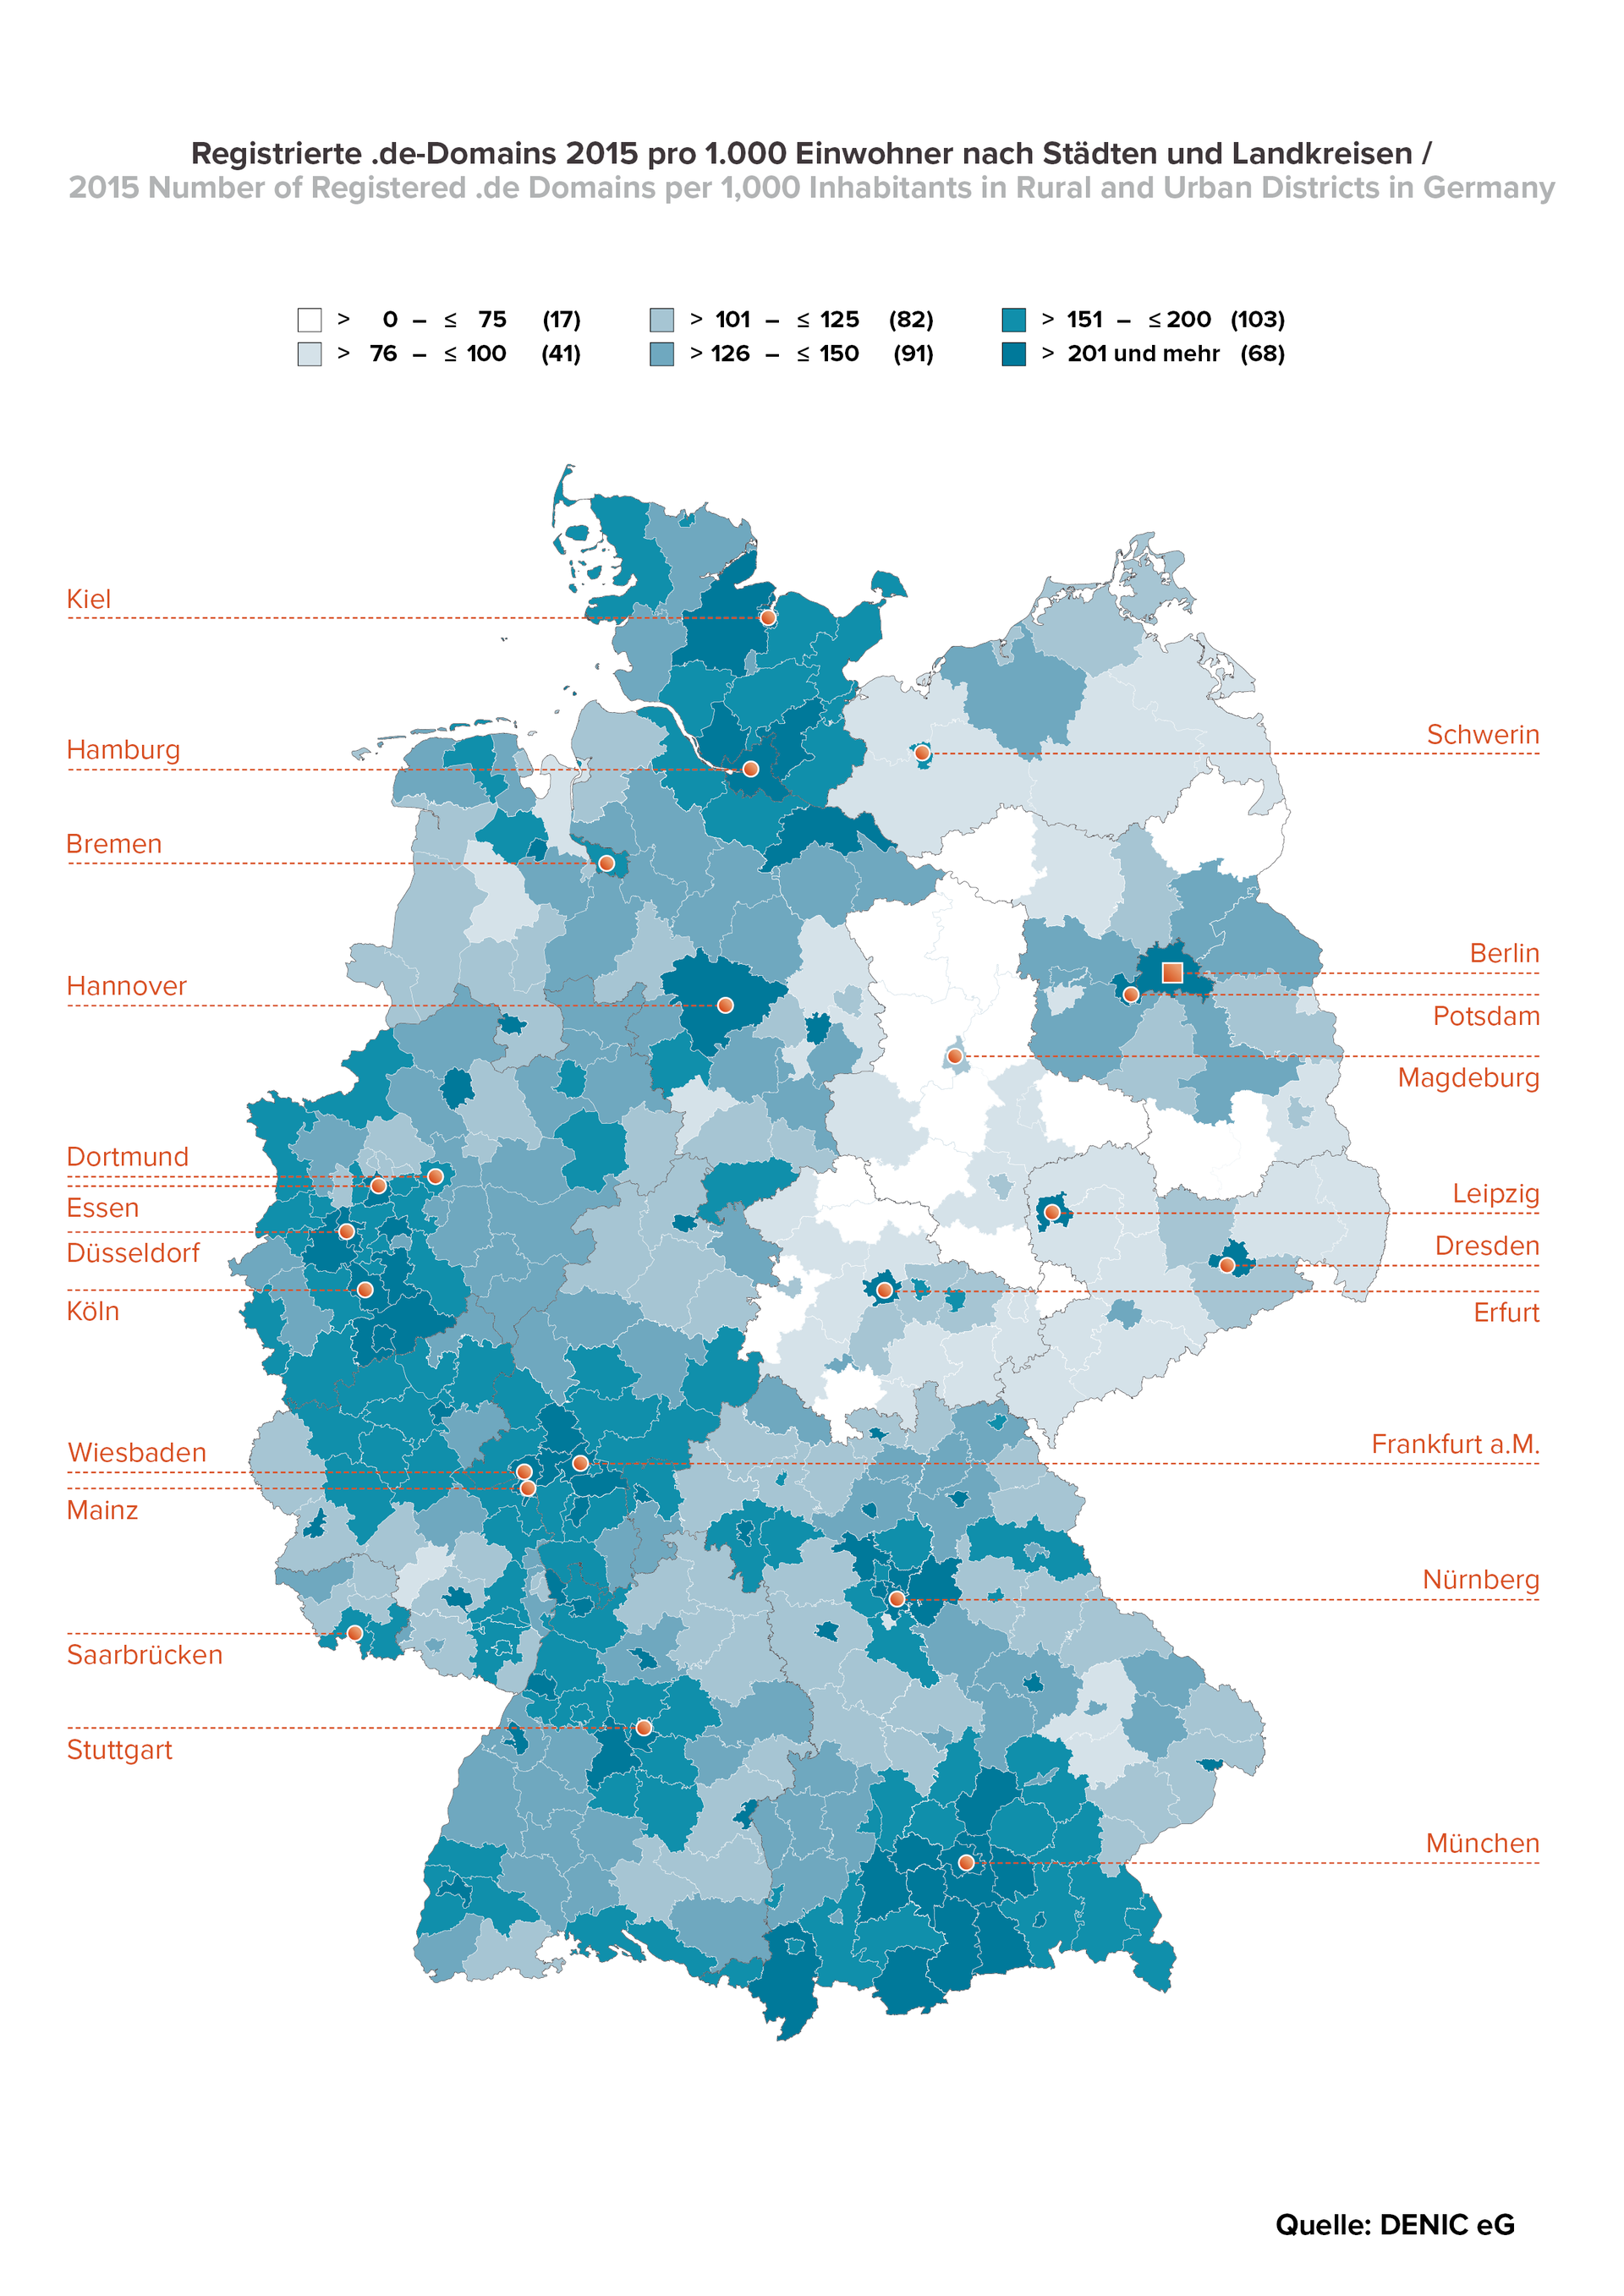 Number of Registered .de Domains per 1,000 Inhabitants in Rural and Urban District in Germany 2015